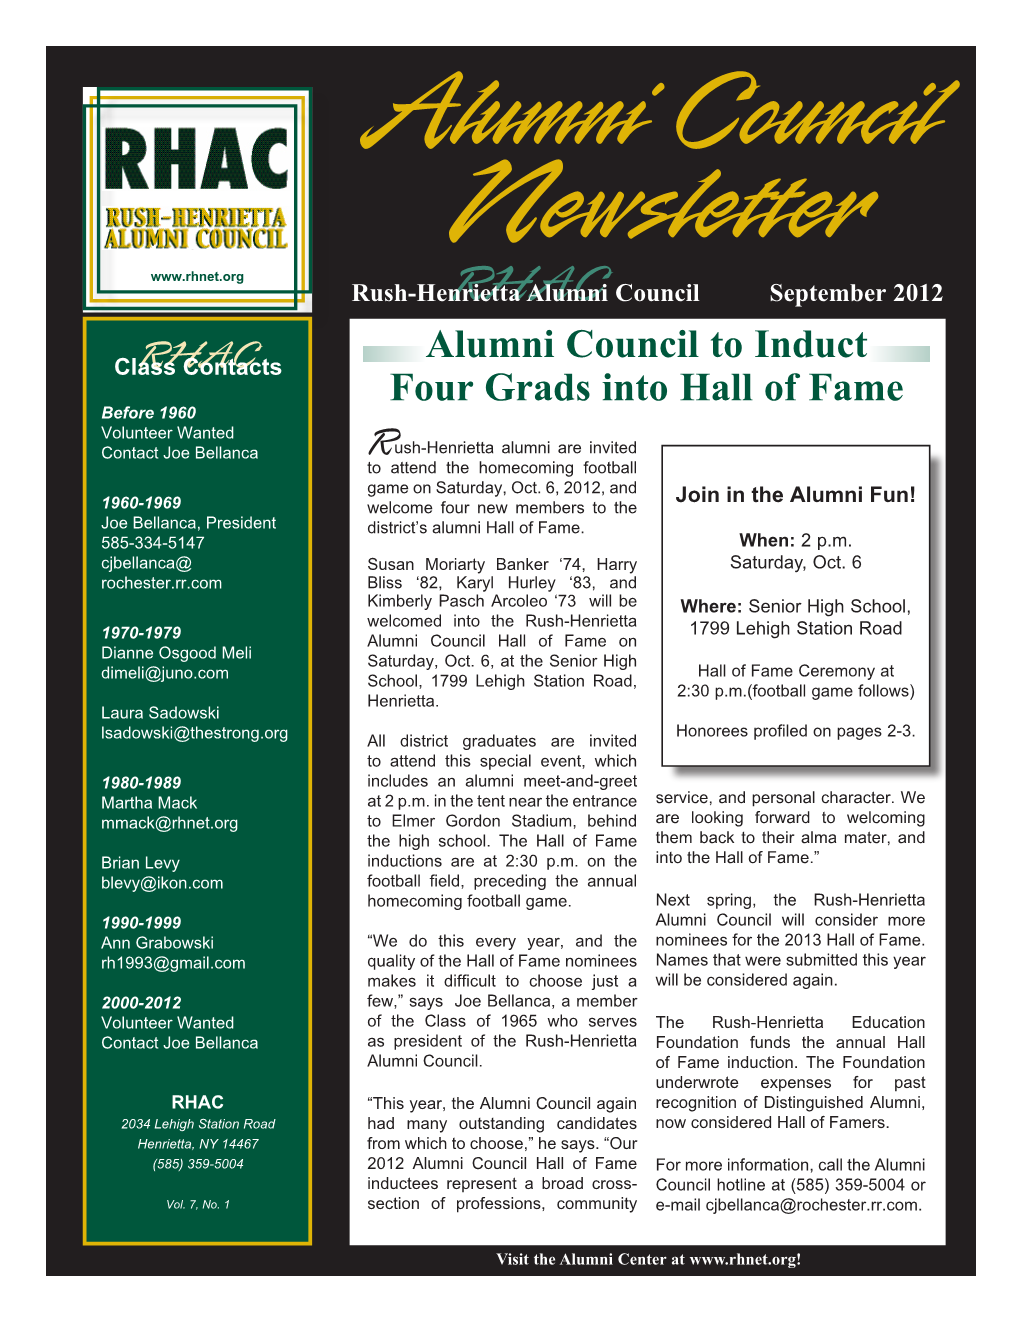 Alumni Council to Induct Four Grads Into Hall of Fame RHAC